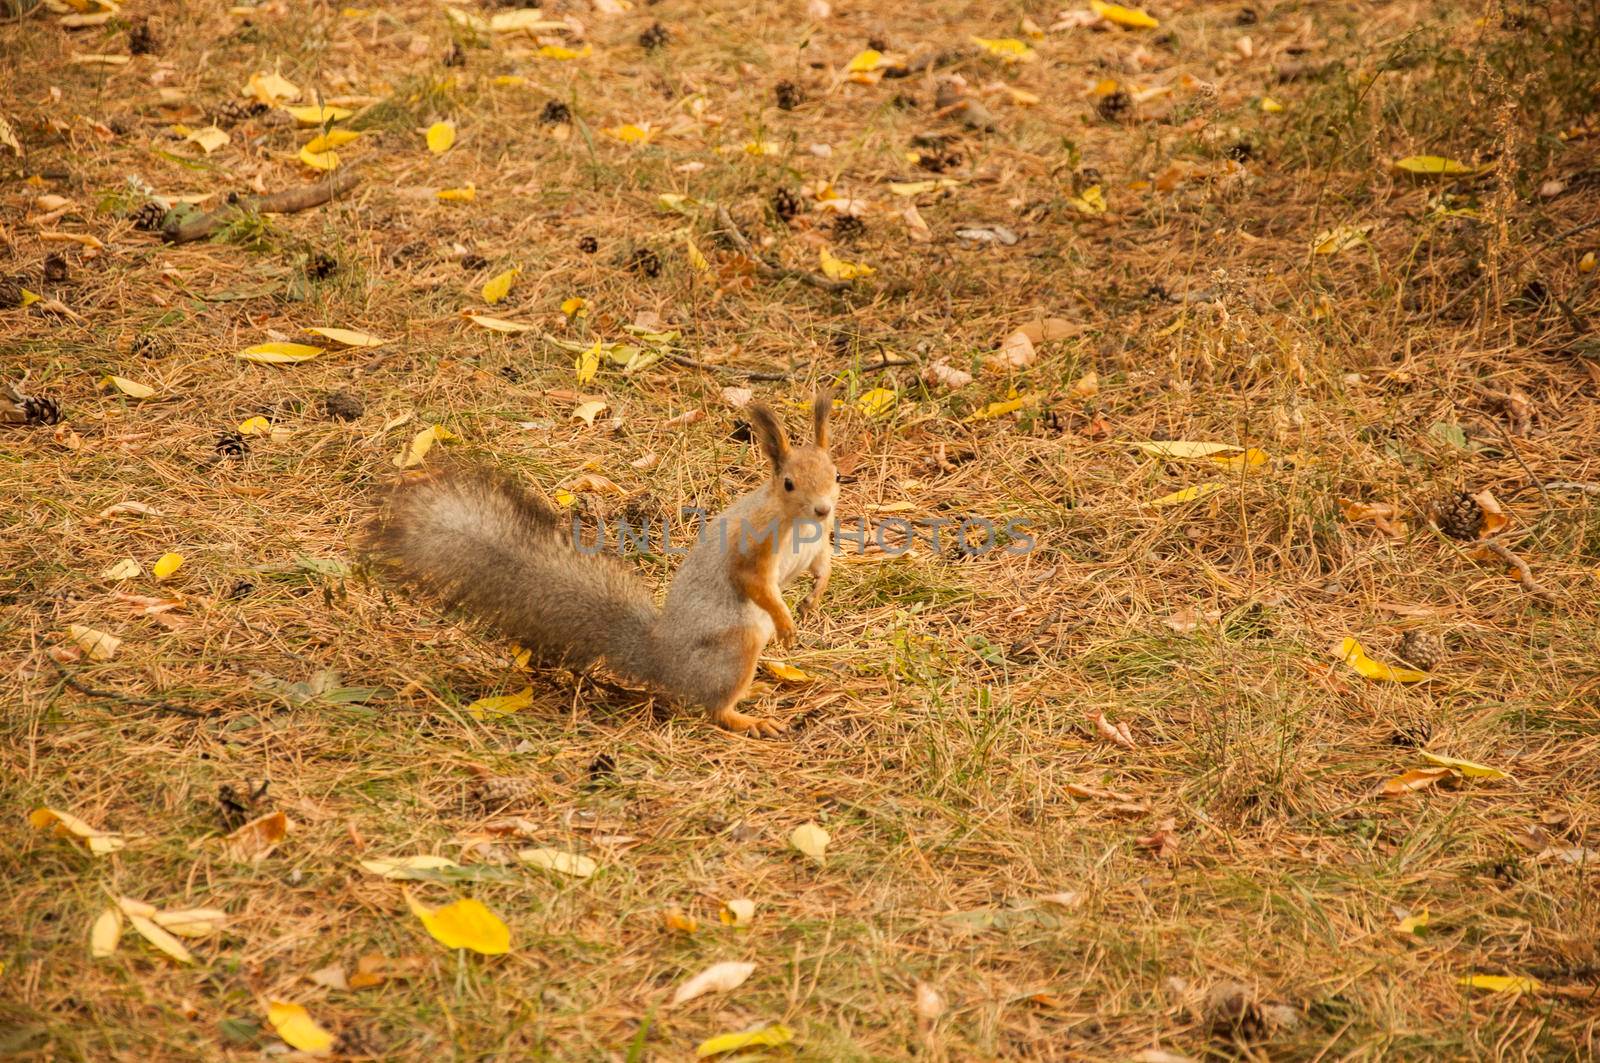  A wild squirel captured in a cold sunny autumn day